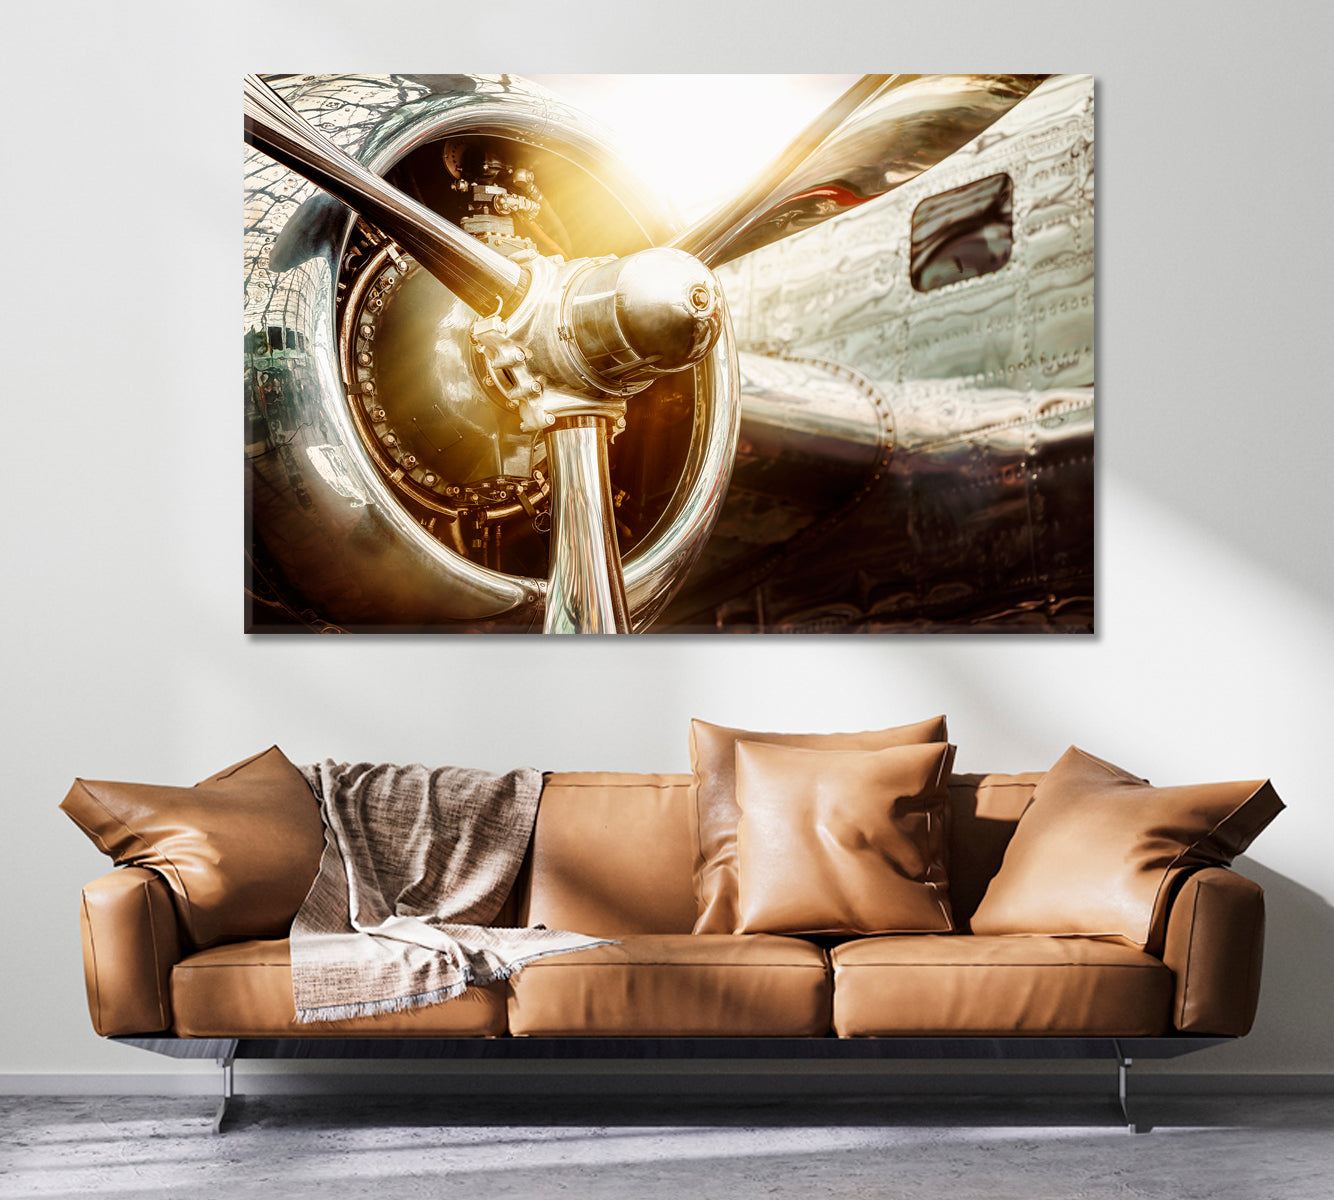 Radial Engine and Propeller of Old Airplane Canvas Print ArtLexy   